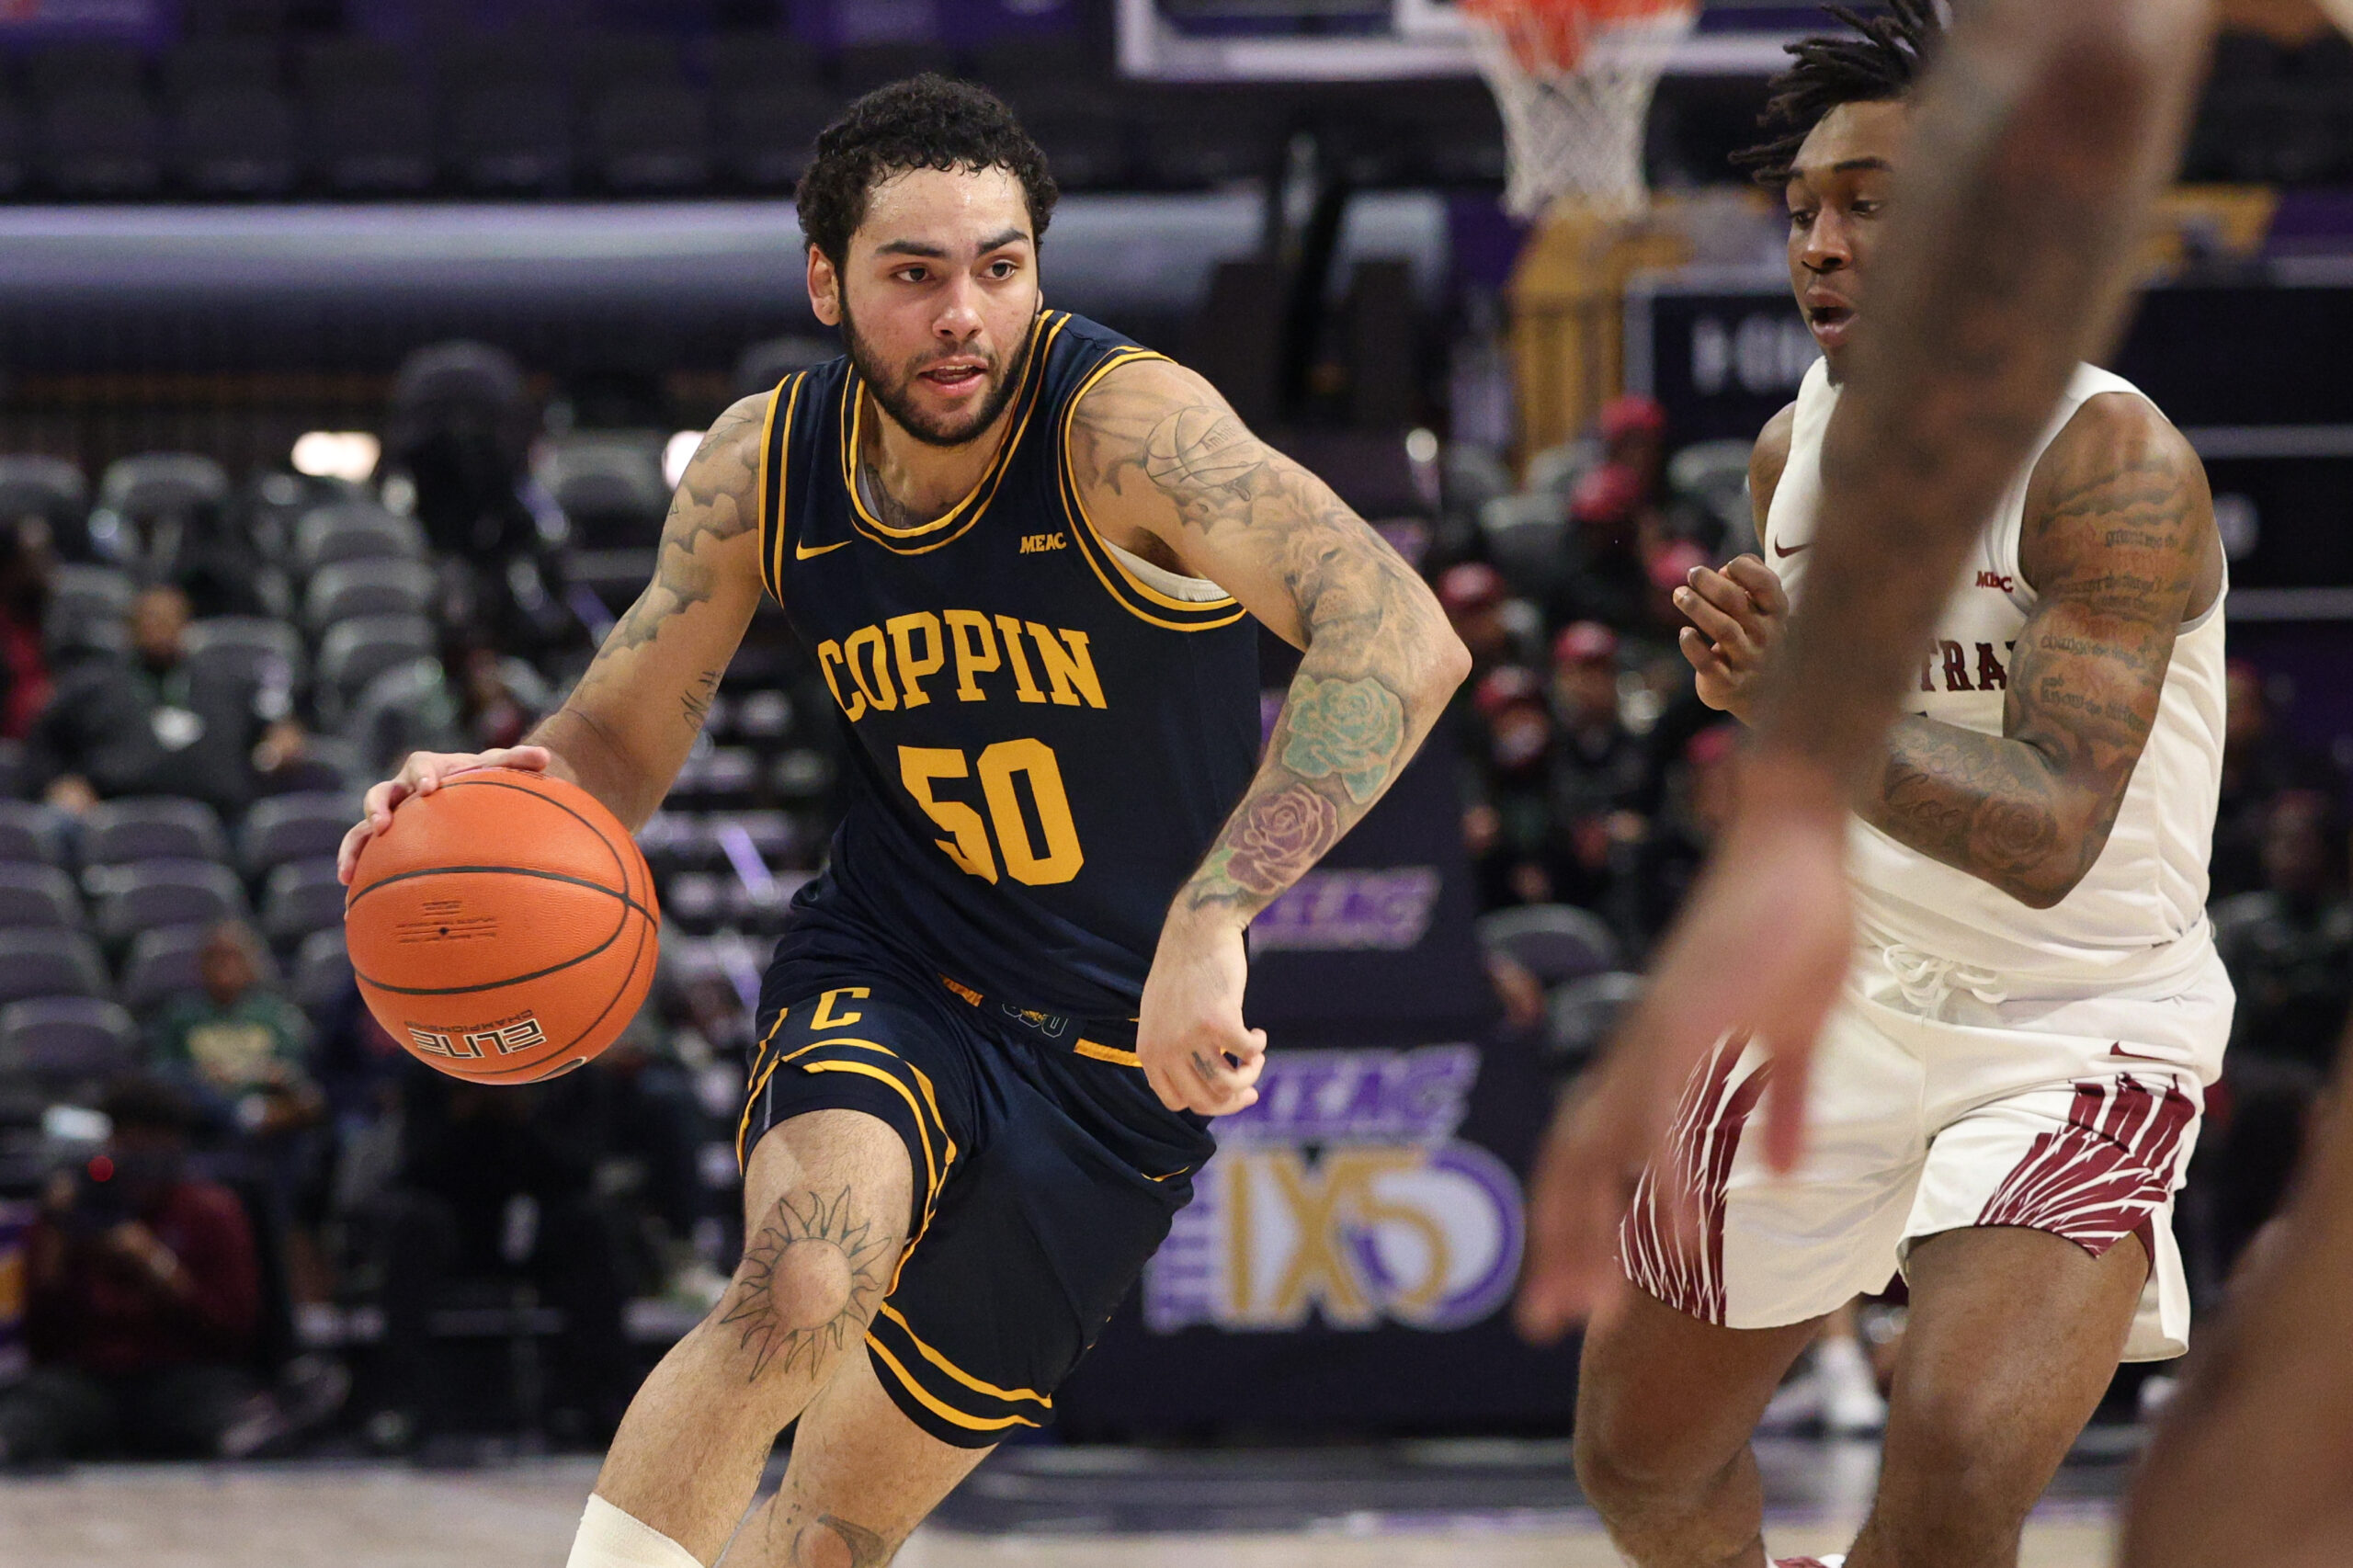 Coppin State Upsets N.C. Central to Reach MEAC Title Game